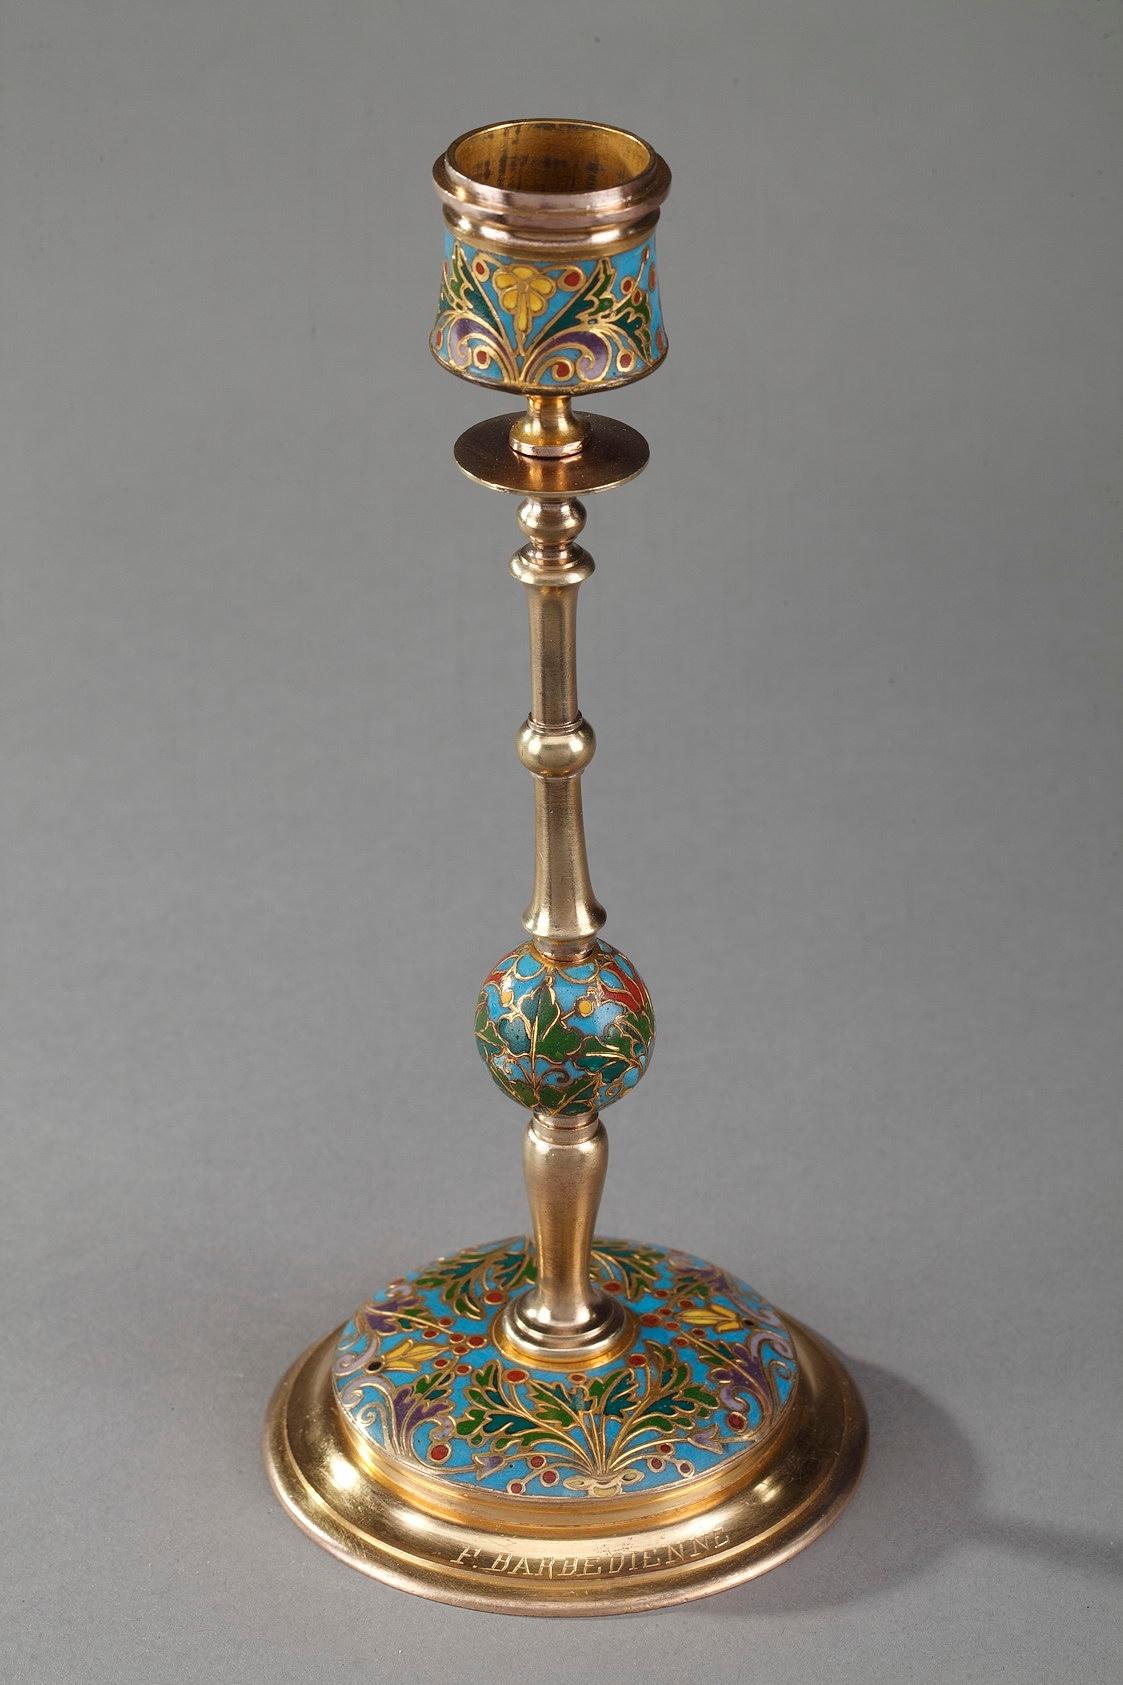 Pair of ormolu, or gilt bronze and champleve enameled candlesticks crafted by Ferdinand Barbedienne (1810-1892), one of the finest French craftsmen of the 19th century. The stems are supported by a circular base. The nozzle, base and central ball